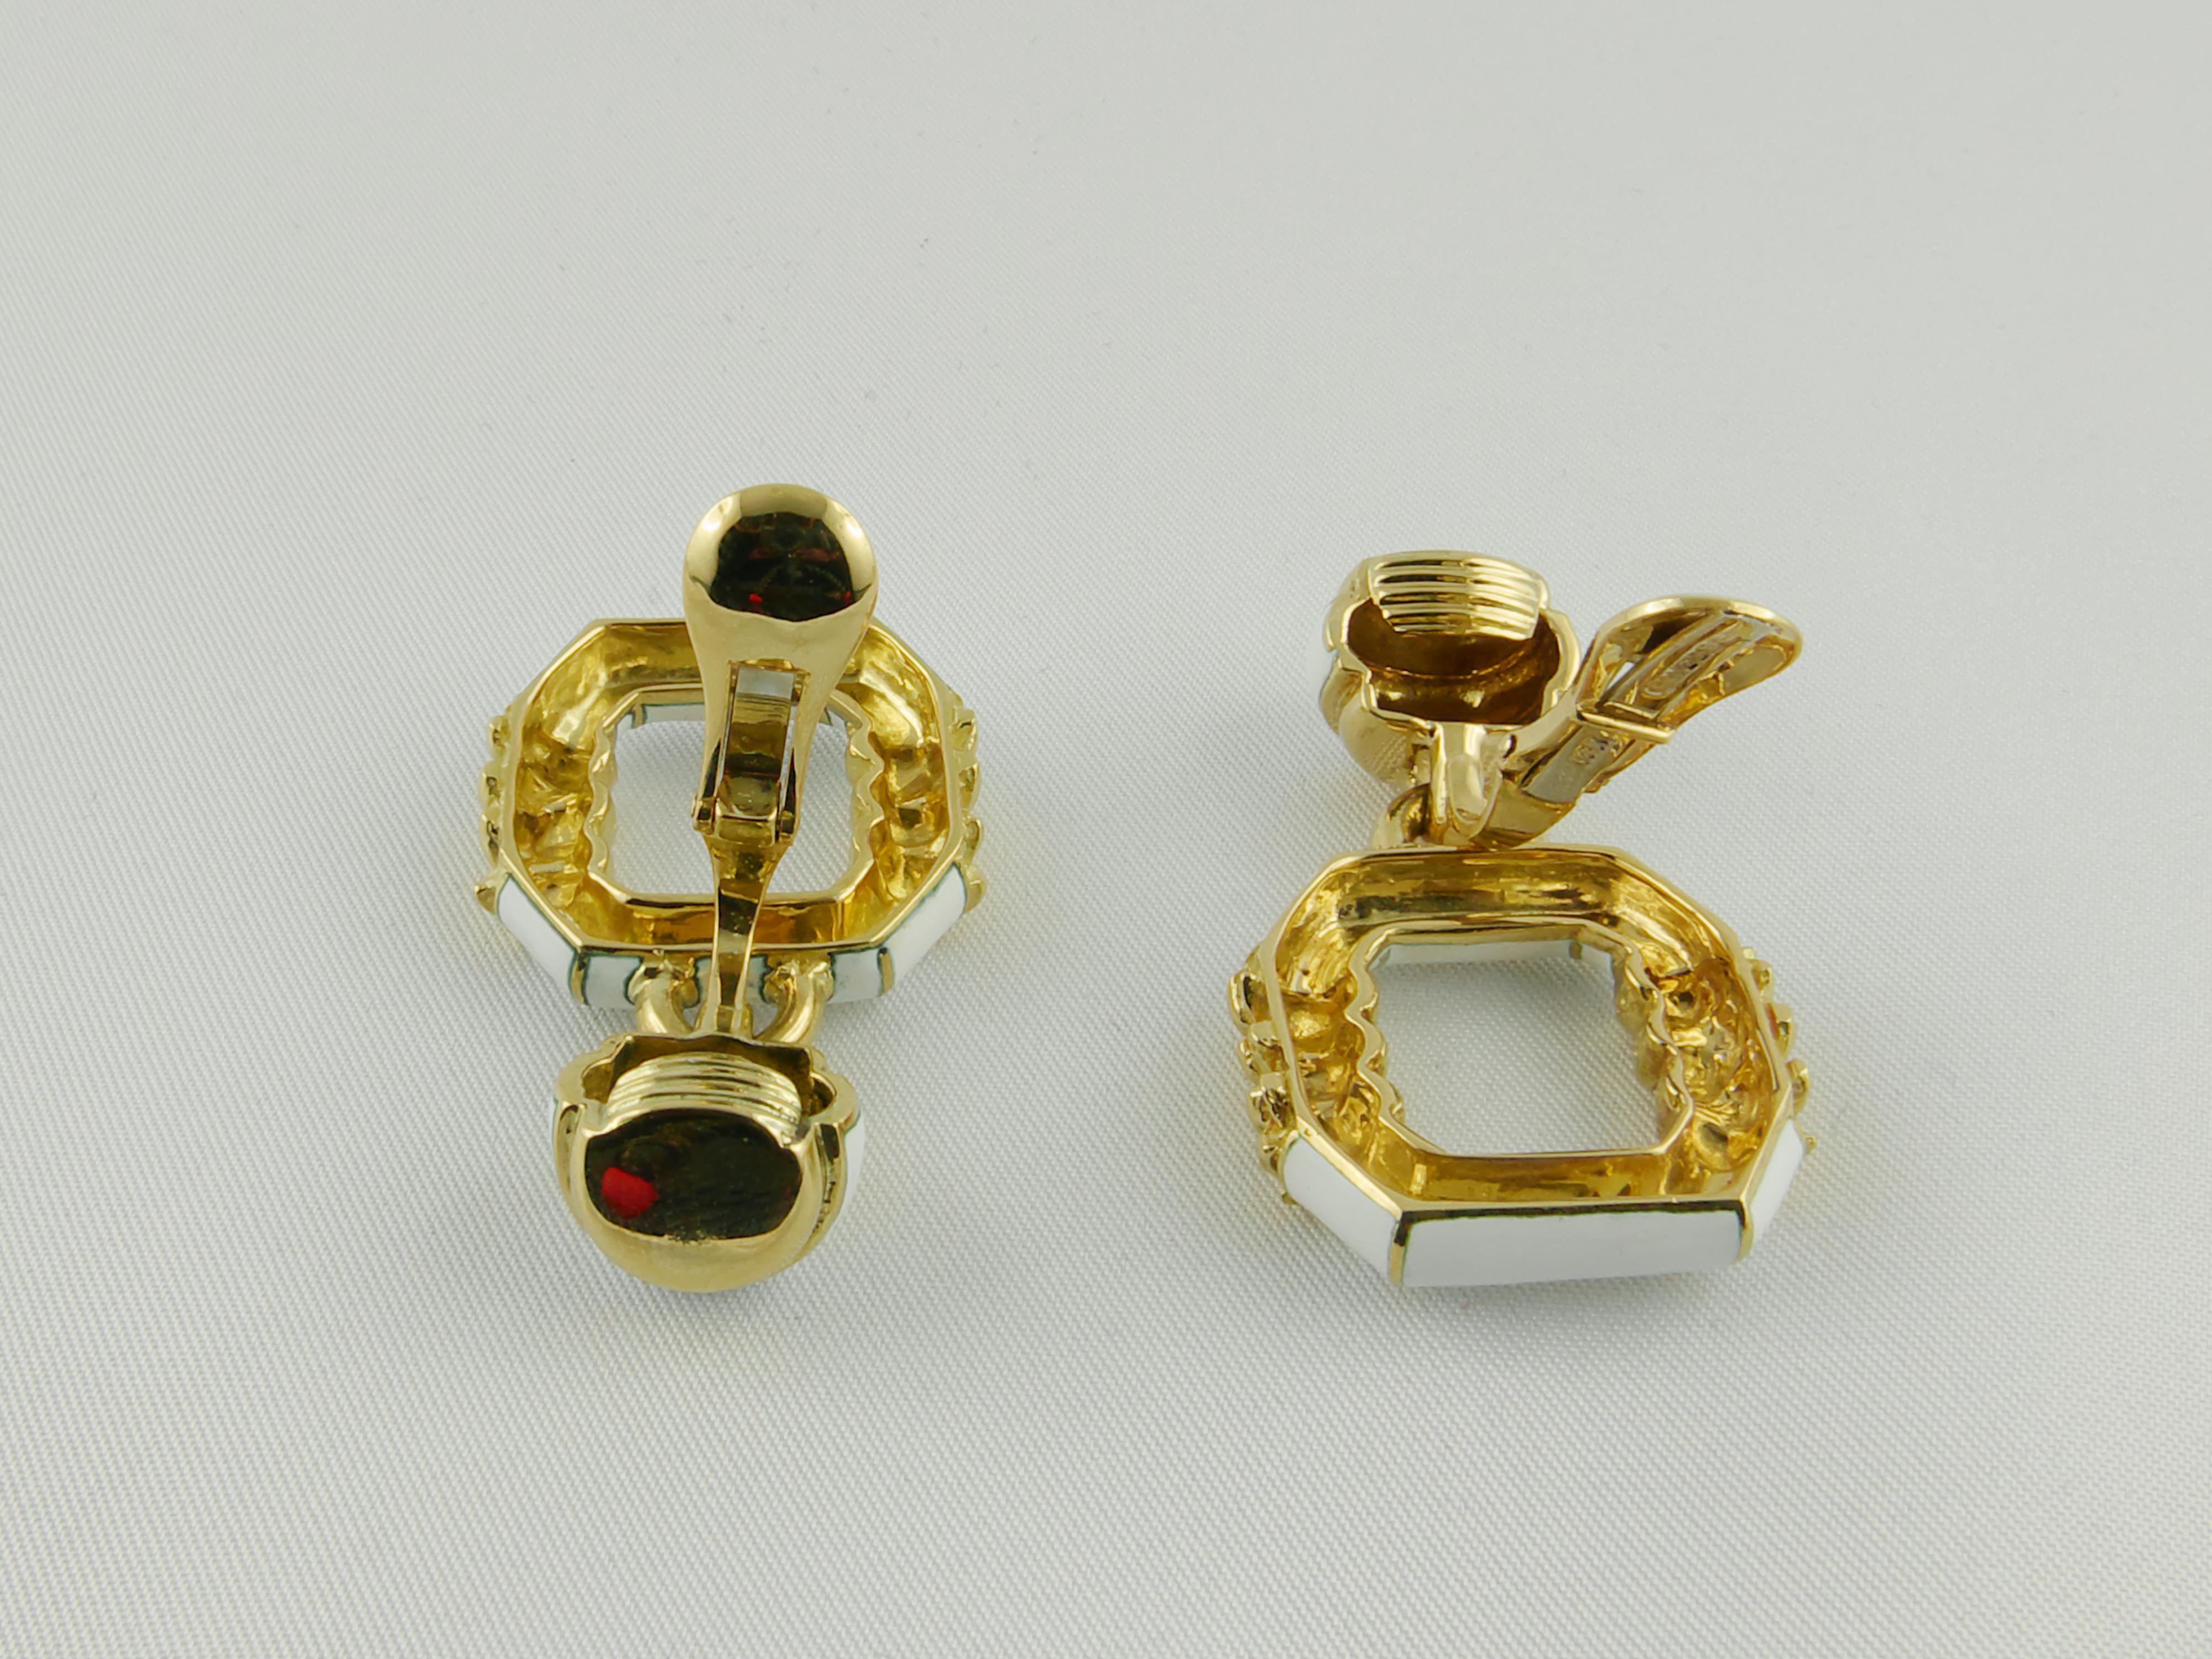 David Webb timeless and extremely wearable Ear Pendants in Yellow 18 karat Gold and White Enamel. Crafted with uncompromising attention to detail and with the finest materials in the 1970s.
These imposing door knocker style Earrings have an